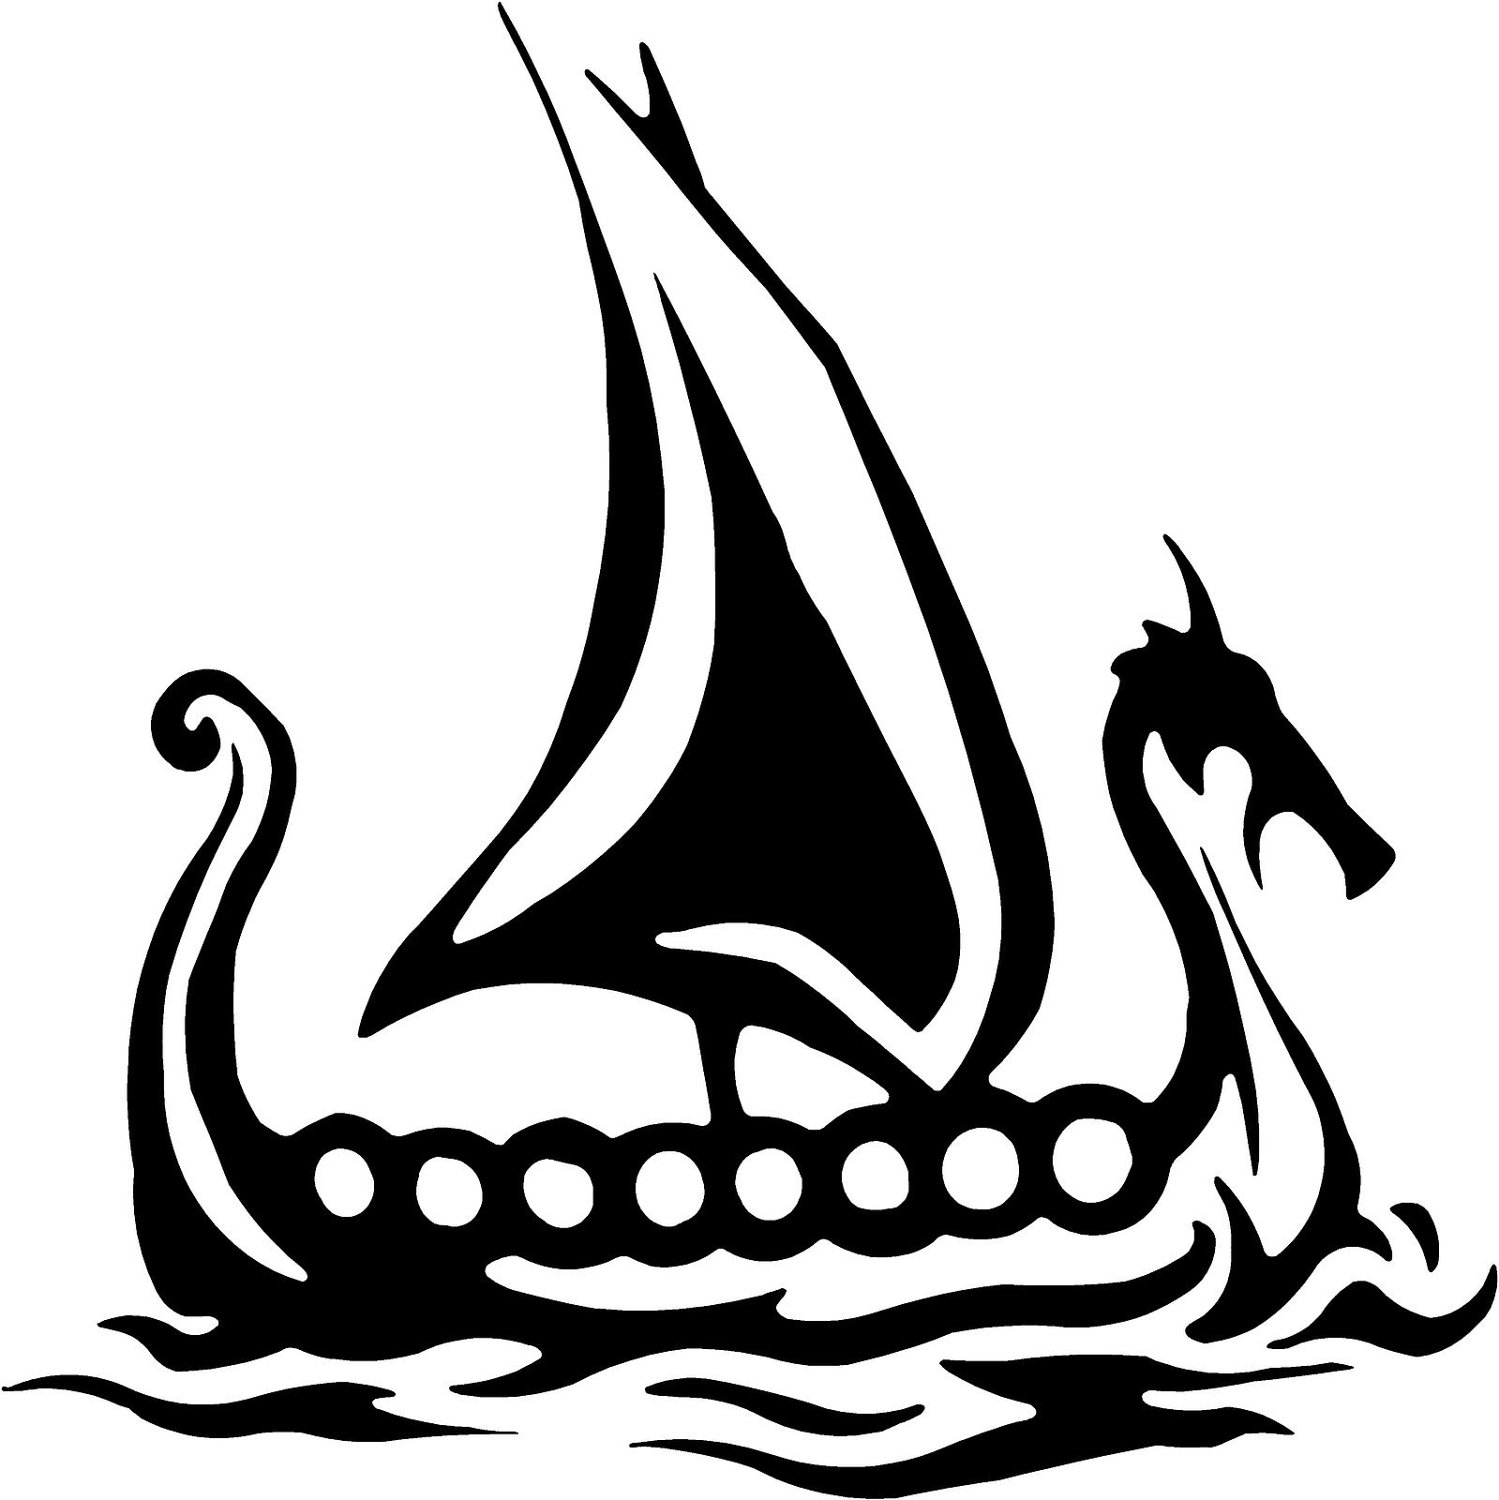 Viking Ship Drawing - ClipArt Best